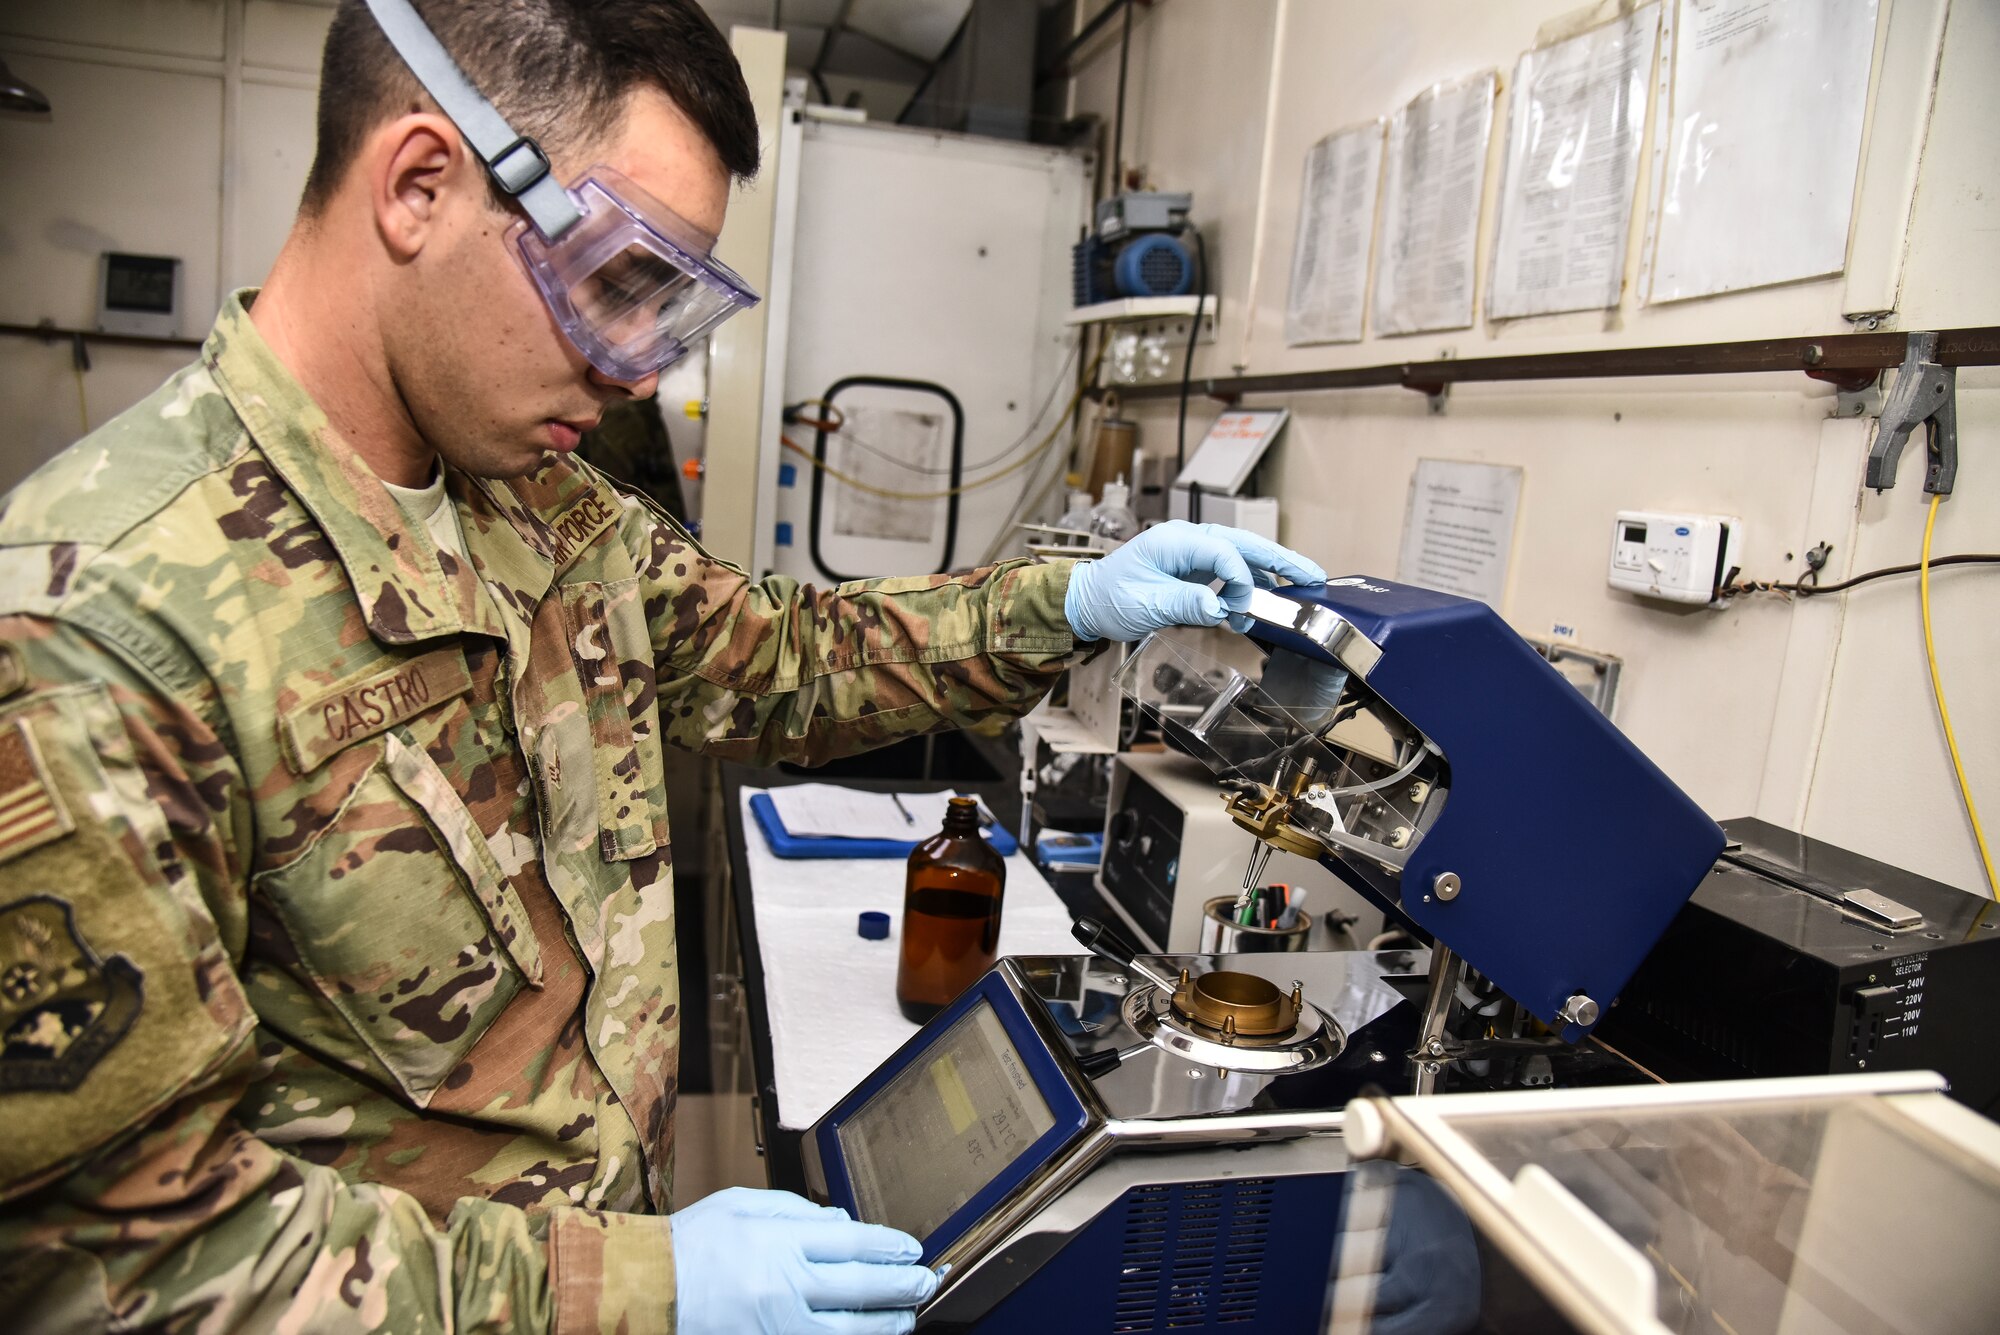 U.S. Air Force Senior Airman Anthony Castro, 380th Expeditionary Logistics Readiness Squadron fuels laboratory technician, operates an Automated Flash Tester at Al Dhafra Air Base, United Arab Emirates, Jan. 21, 2019. The lab personnel sample all fuel grades from the fuel bladders, tanks, trucks and pipeline receipt on a daily basis. (U.S. Air Force photo by Senior Airman Mya M. Crosby)